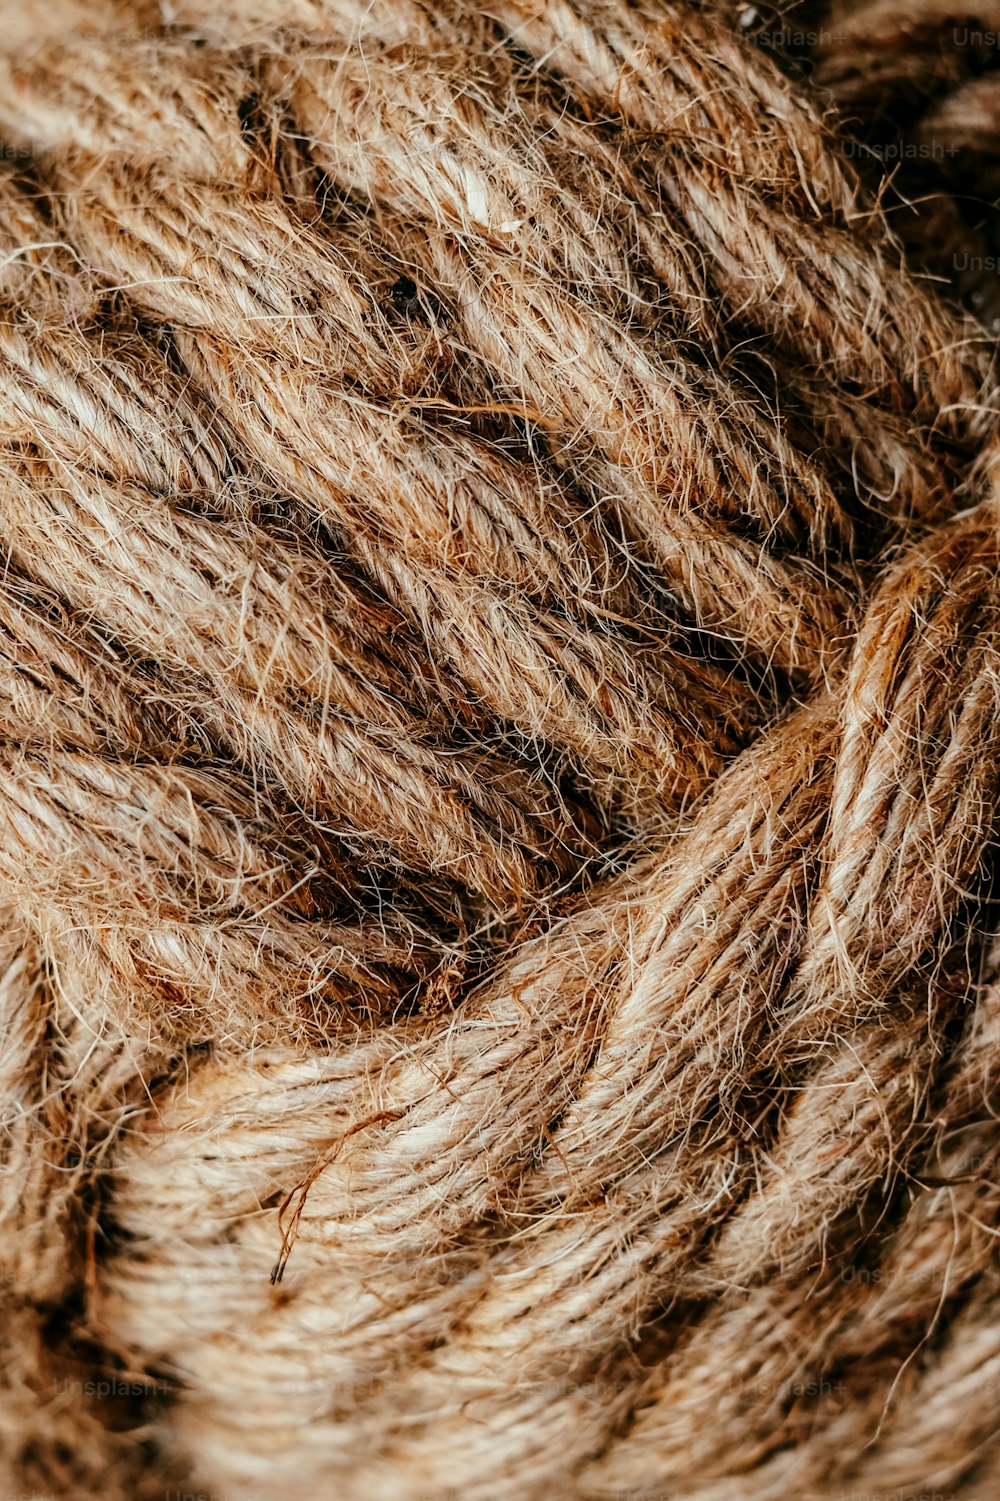 27+ Yarn Pictures  Download Free Images on Unsplash